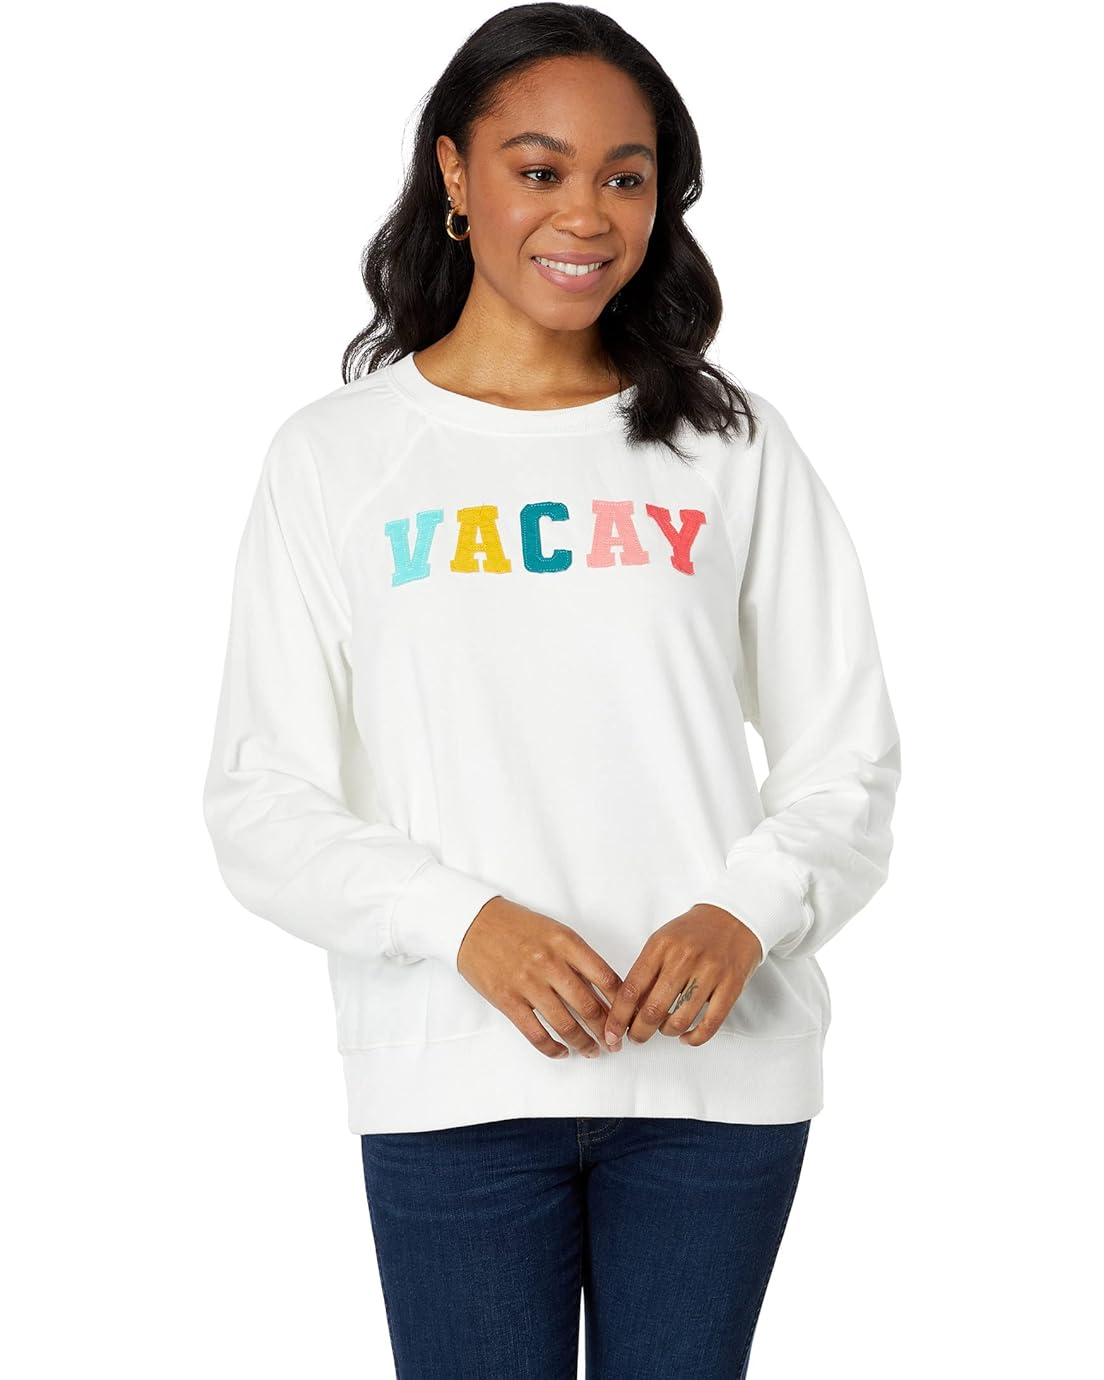 Wildfox Vacay French Terry Sommers Sweatshirt